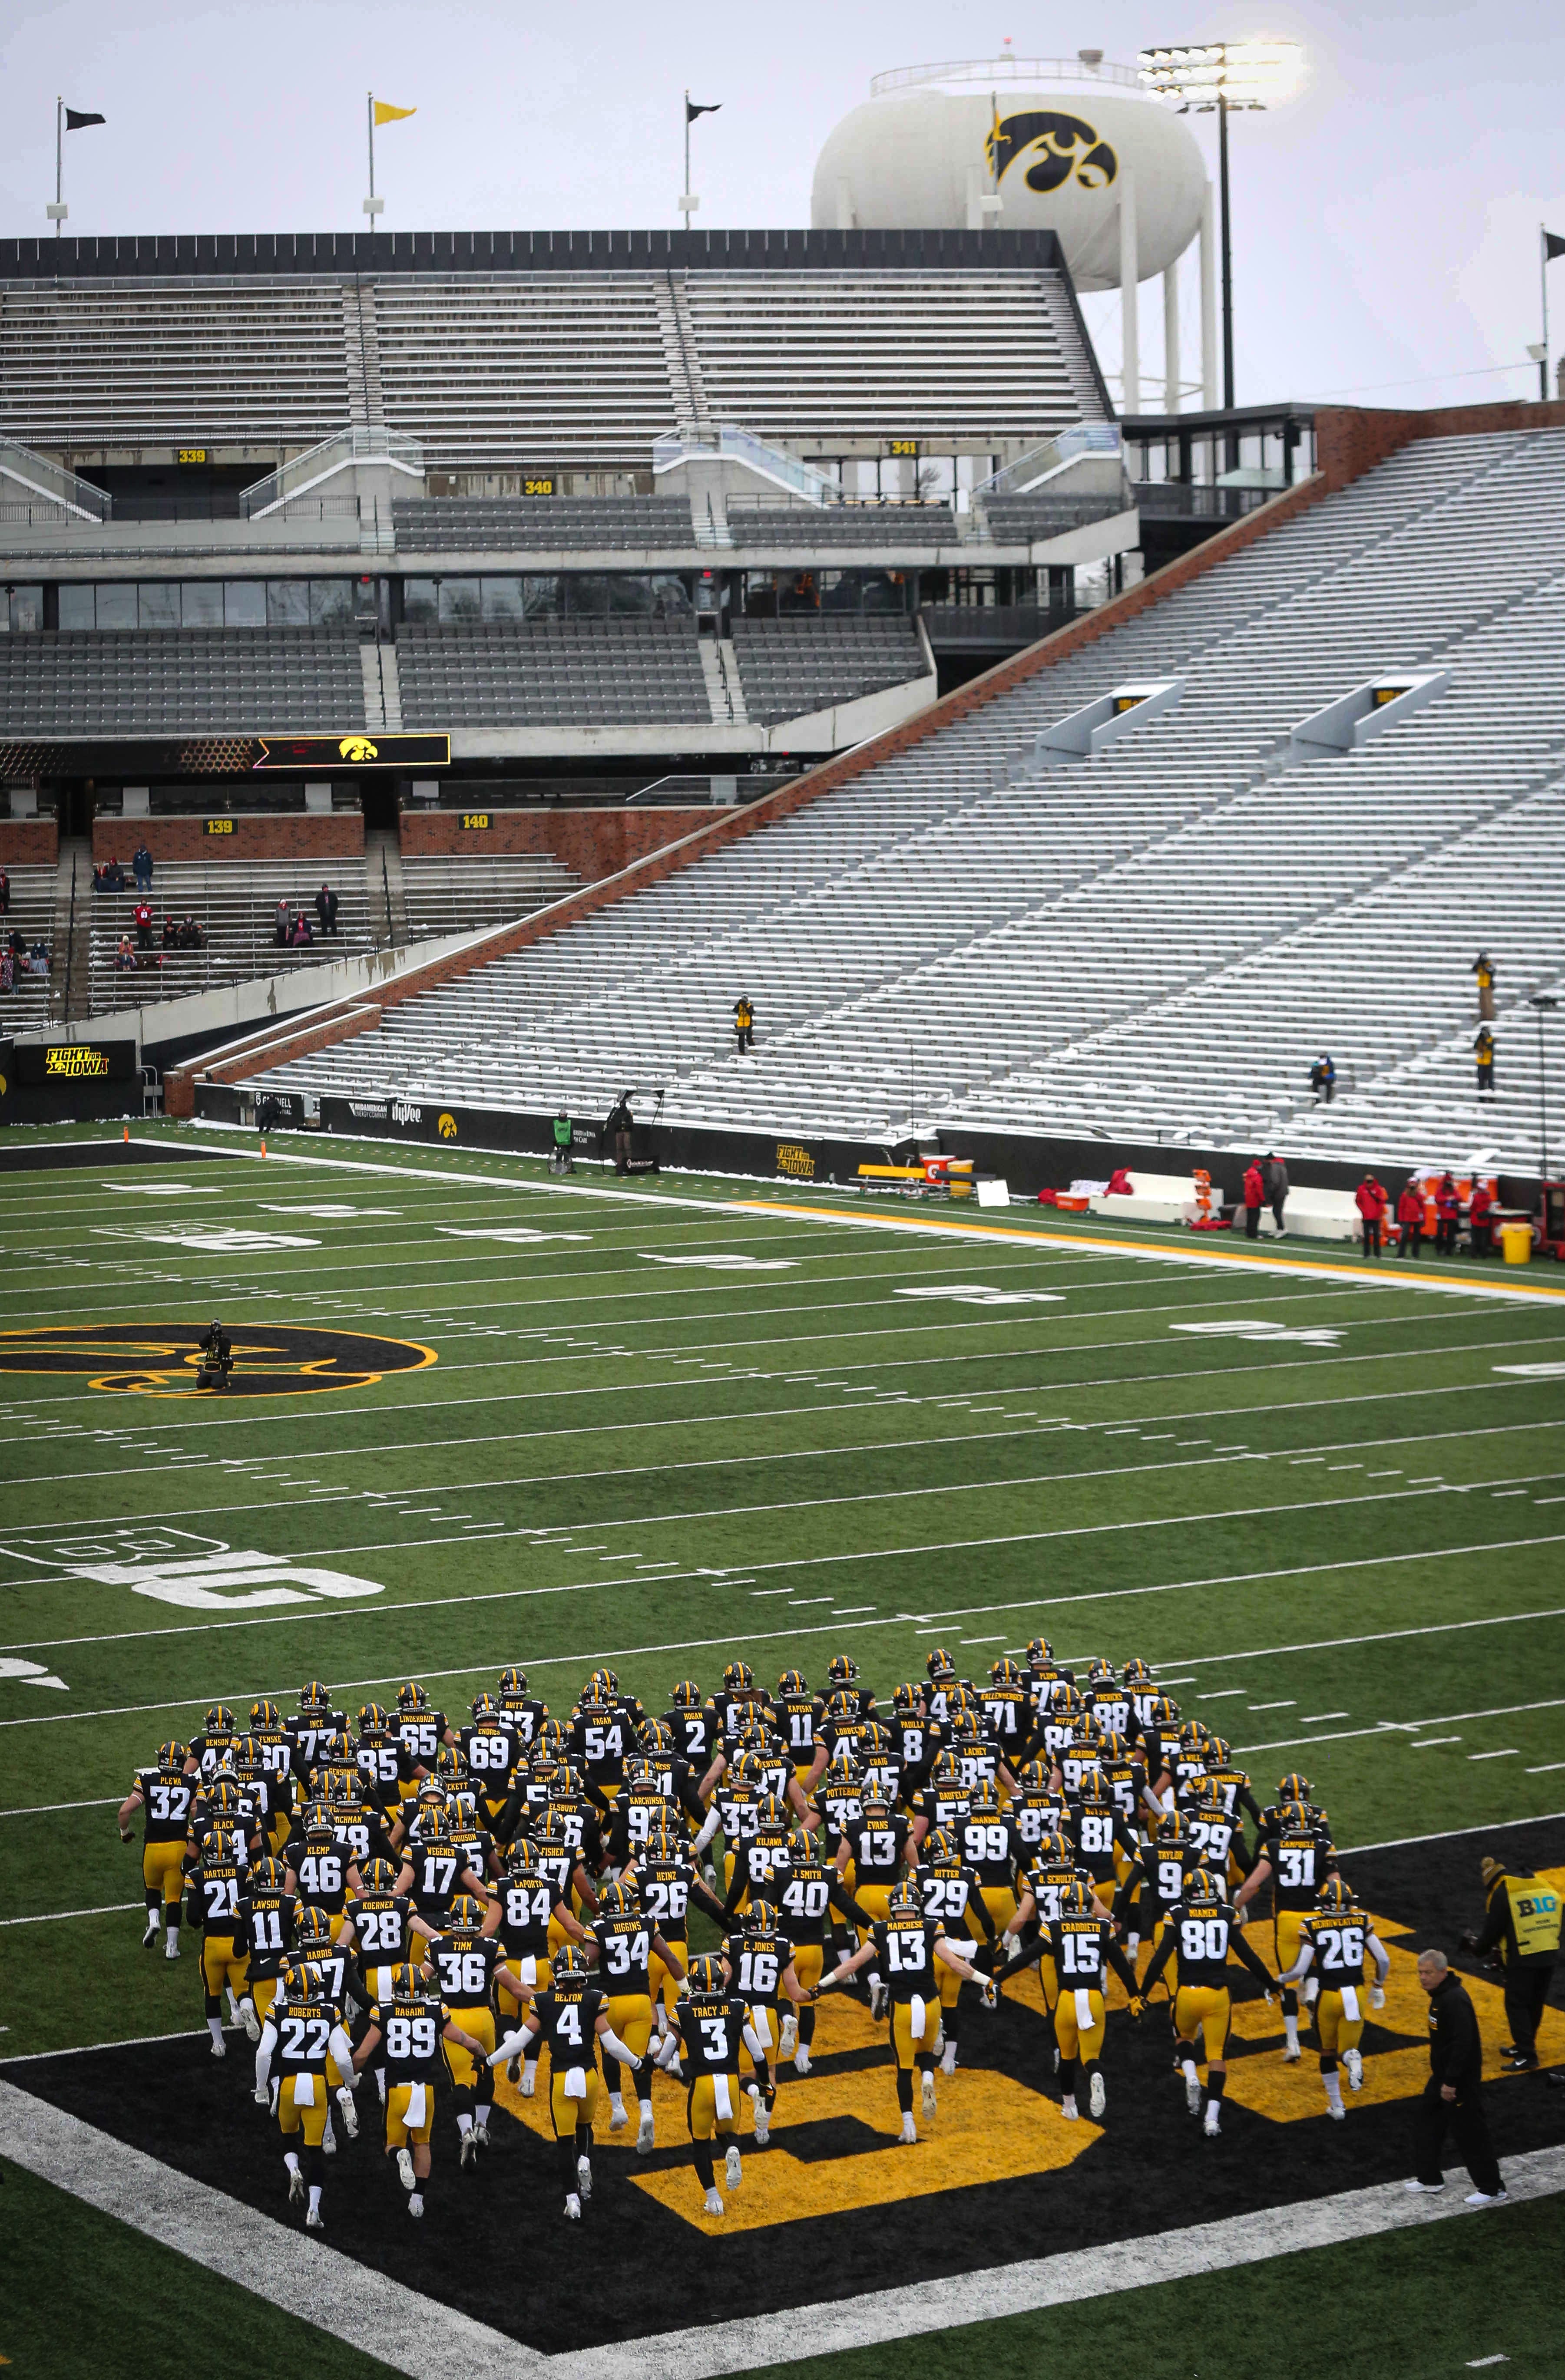 Members of the Iowa Hawkeyes football team take the field to an empty stadium prior to kickoff against Wisconsin on Saturday, Dec. 12, 2020, at Kinnick Stadium in Iowa City, Iowa.